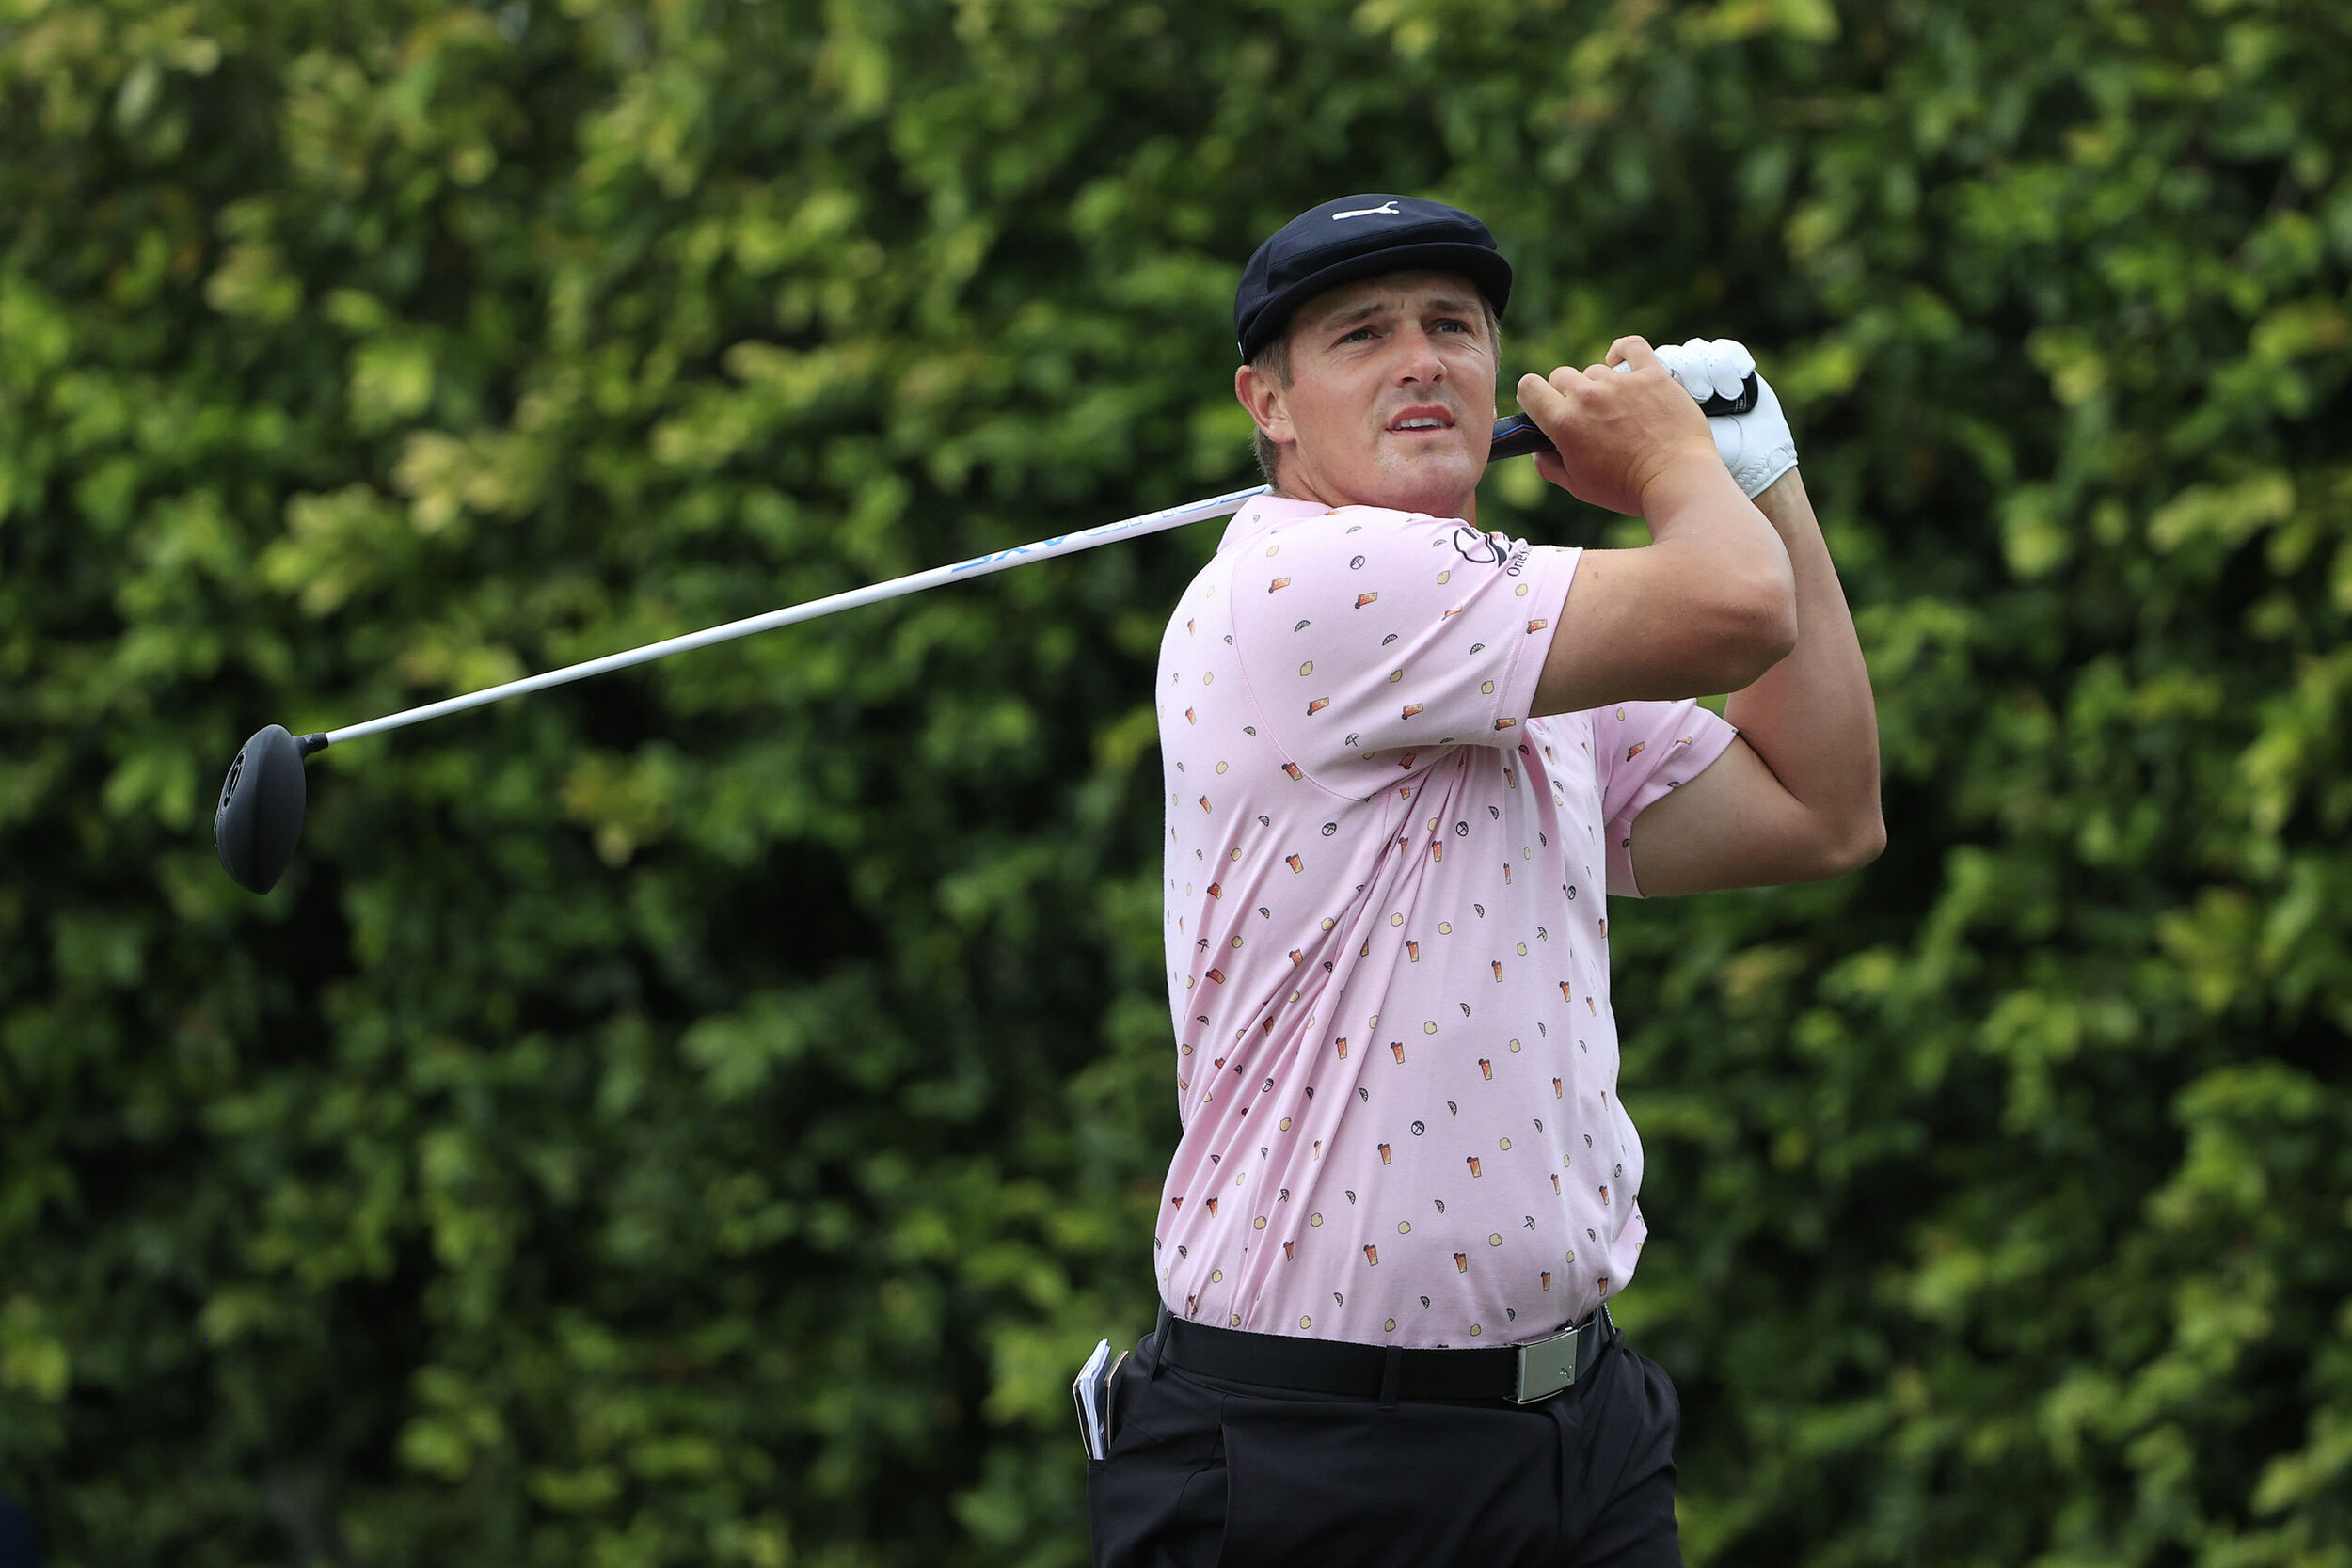  ORLANDO, FLORIDA - MARCH 06: Bryson DeChambeau of the United States plays his shot from the ninth tee during the third round of the Arnold Palmer Invitational Presented by MasterCard at the Bay Hill Club and Lodge on March 06, 2021 in Orlando, Flori